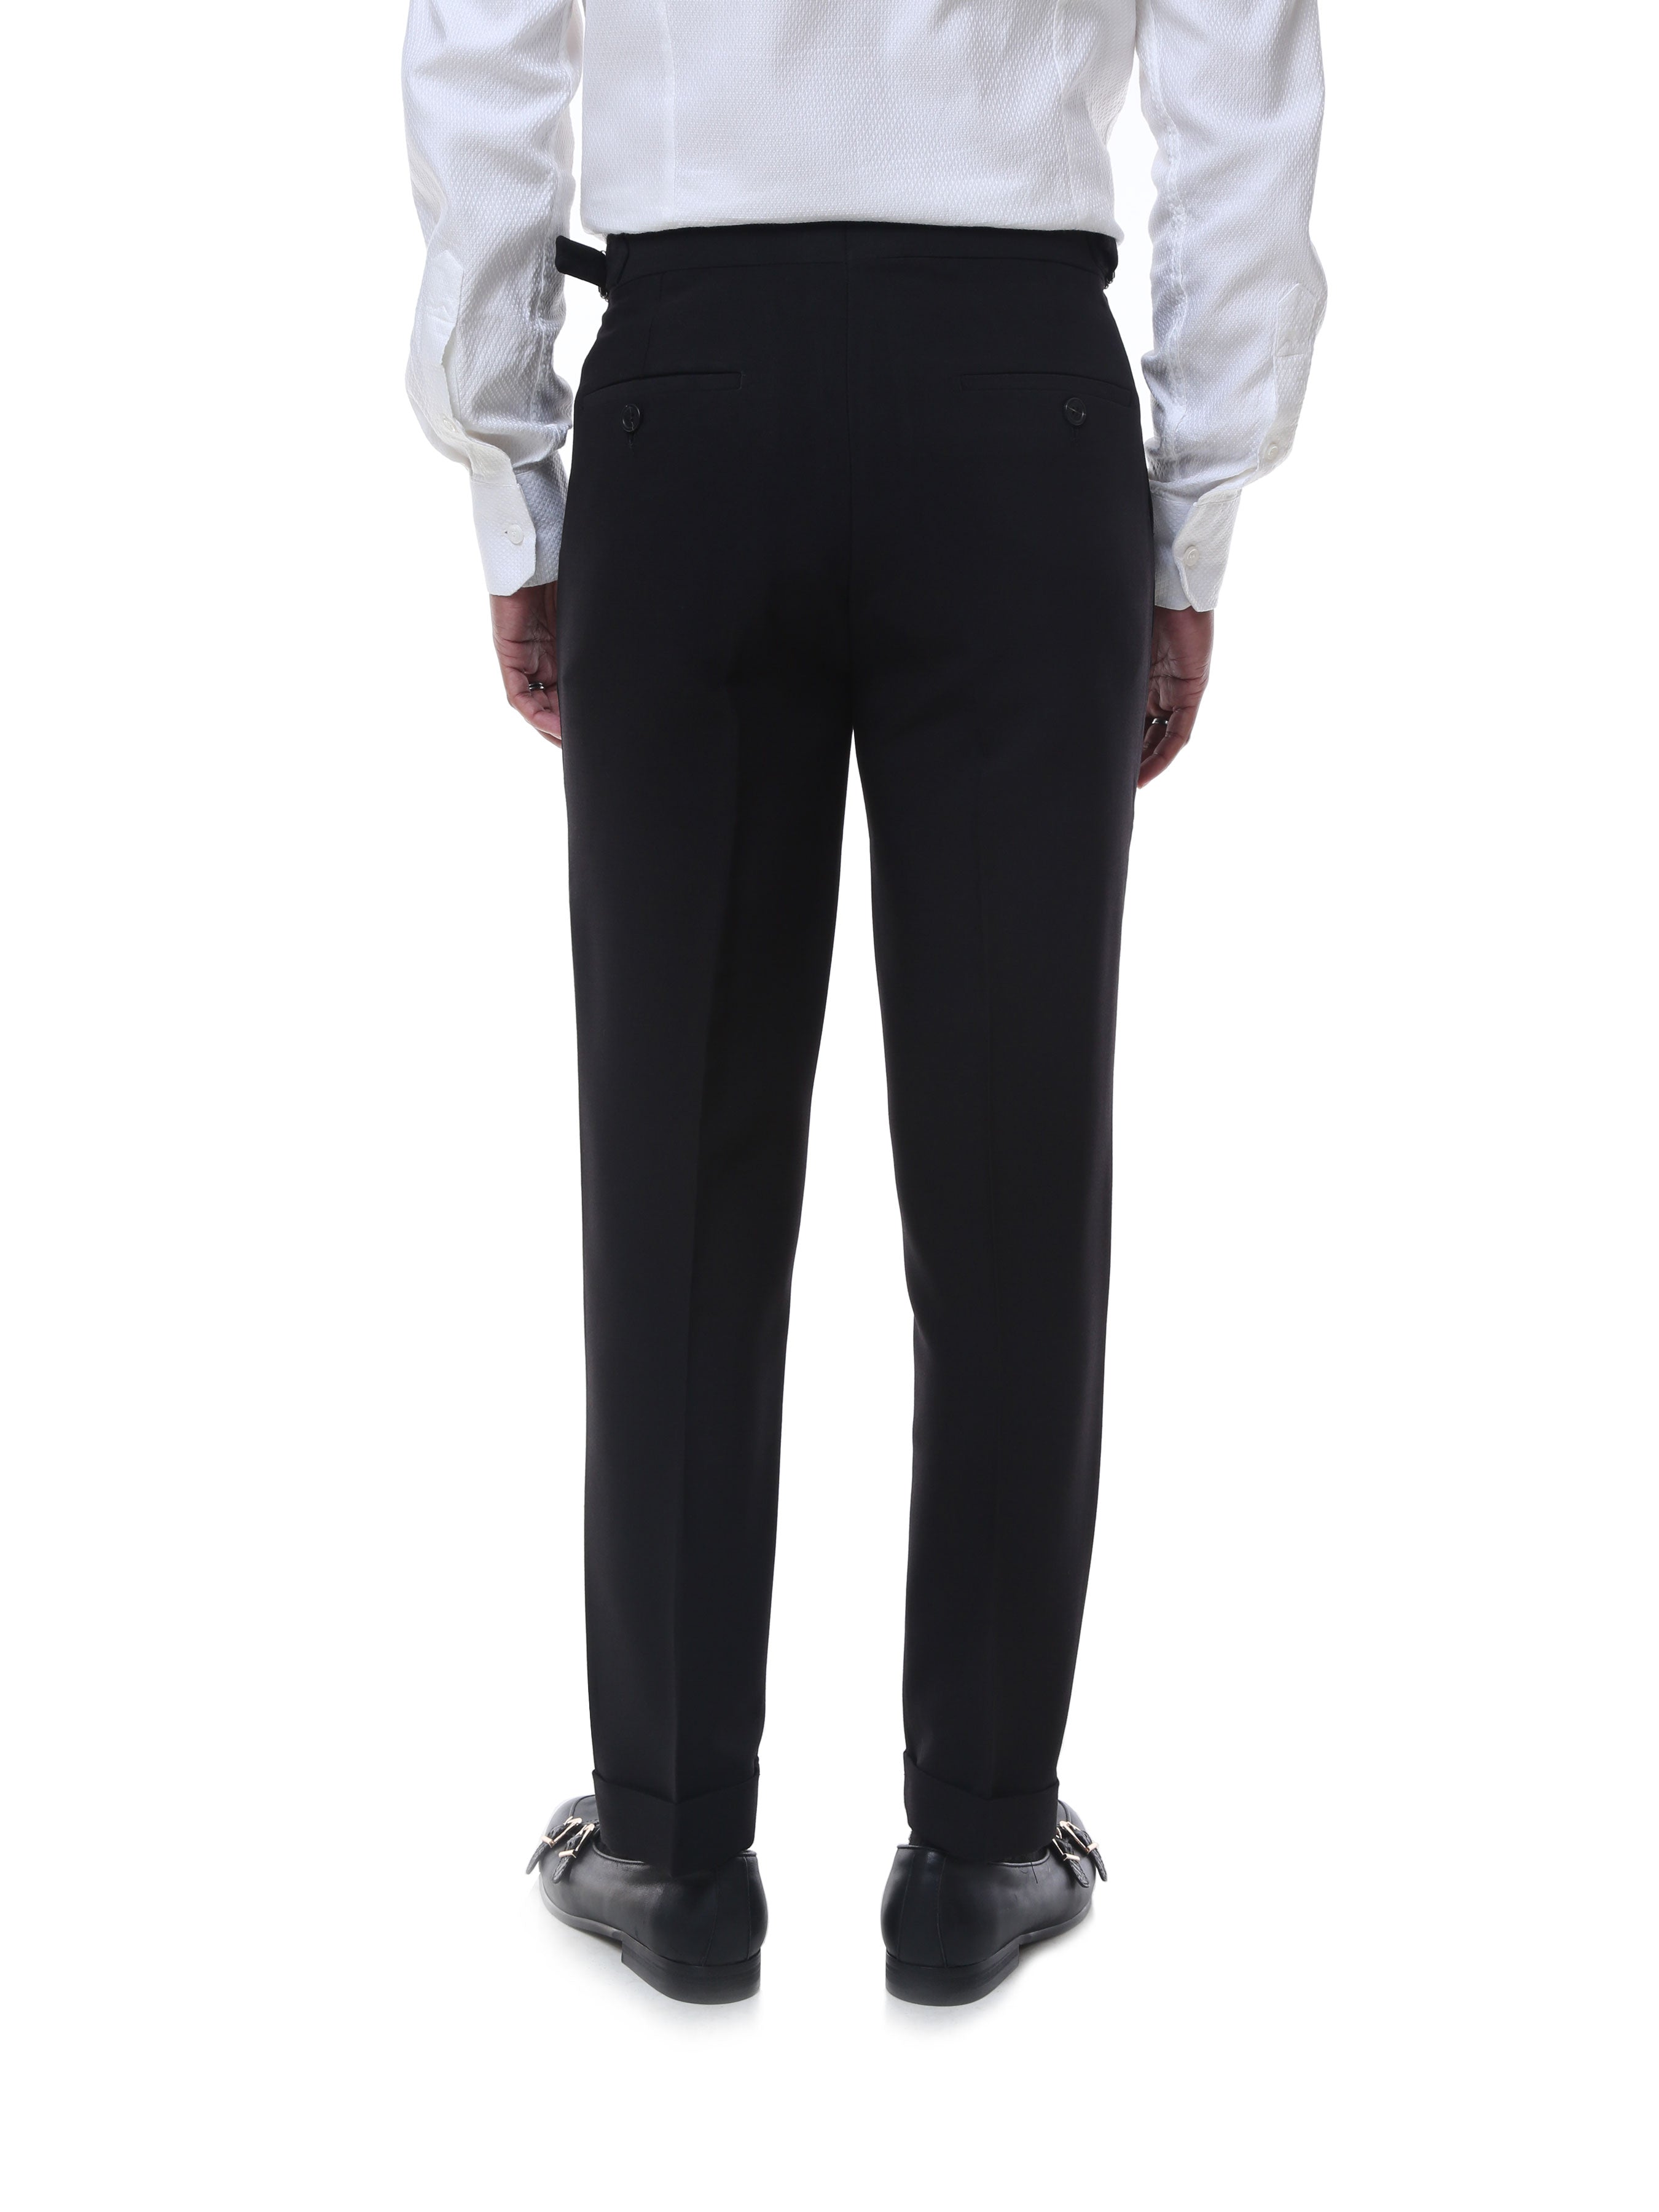 Trousers With Side Adjusters - Black Plain Cuffed (Stretchable) - Zeve Shoes